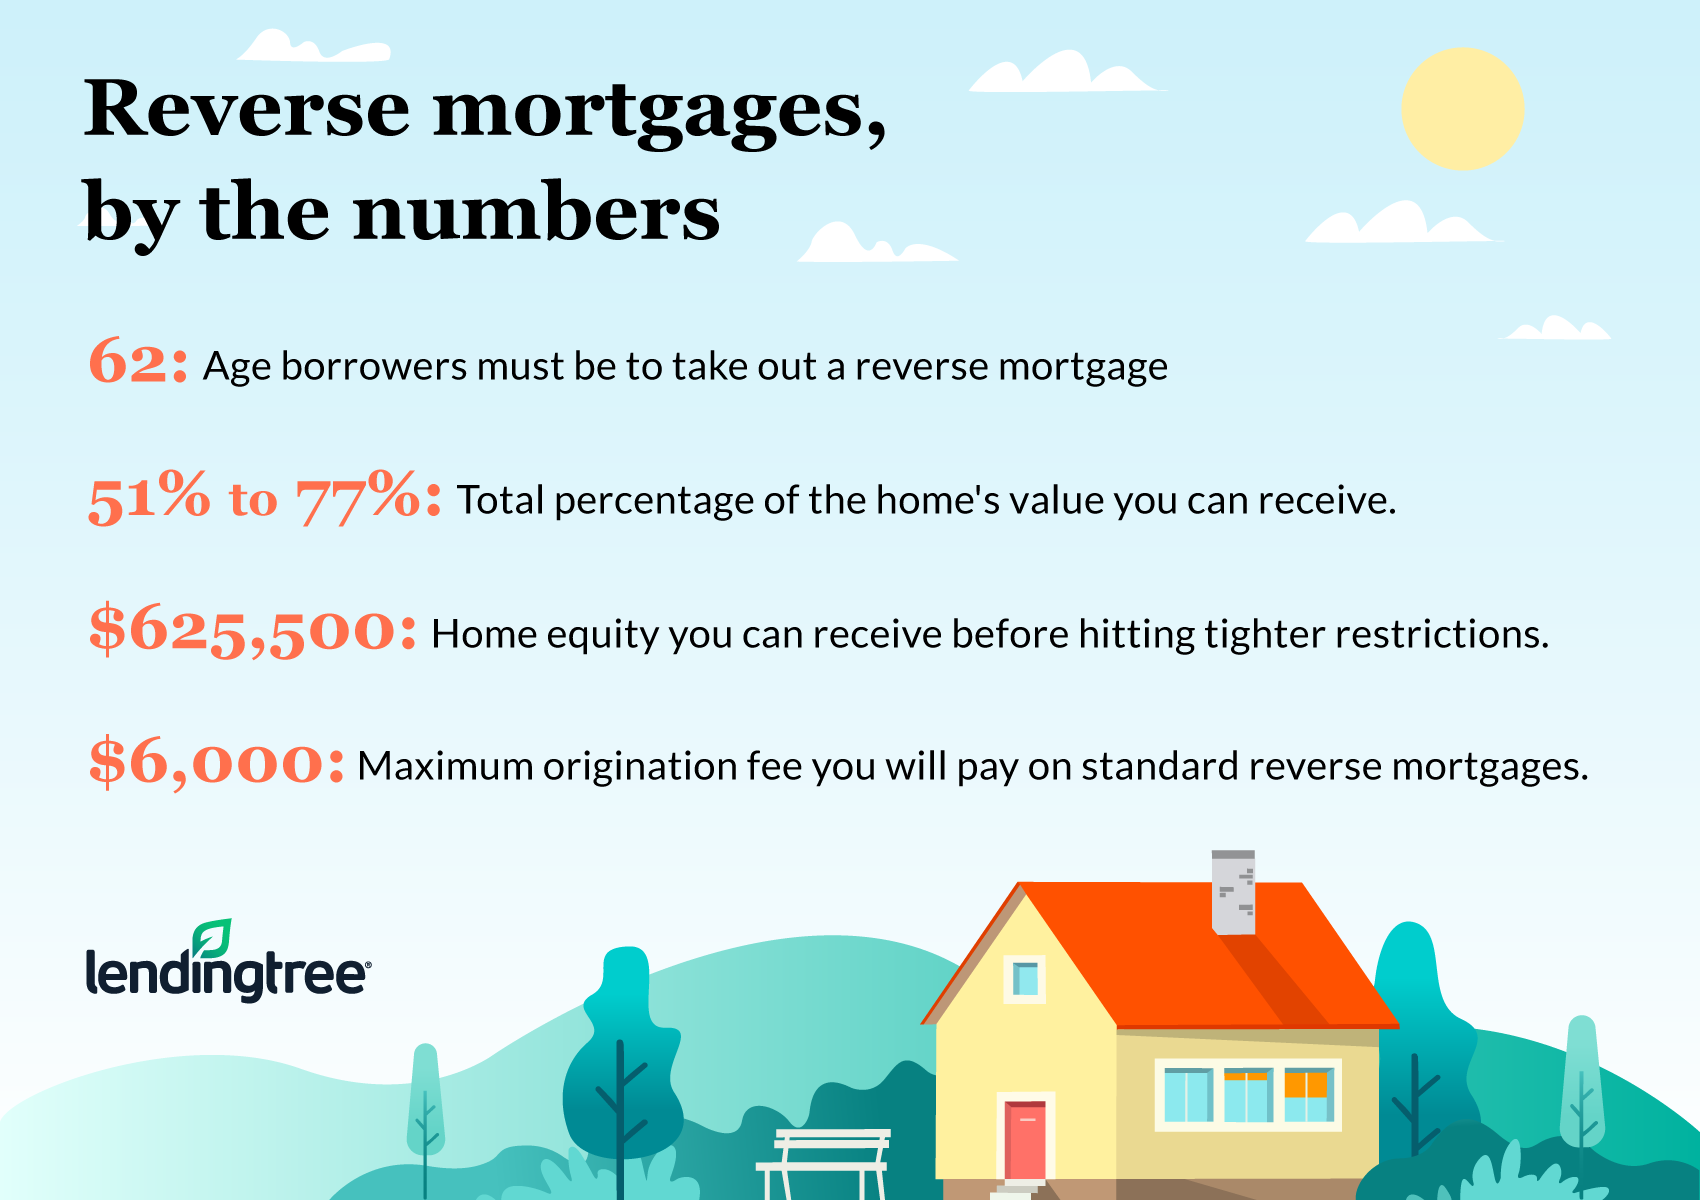 9 Key Reverse Mortgage Questions - Answered - LendingTree